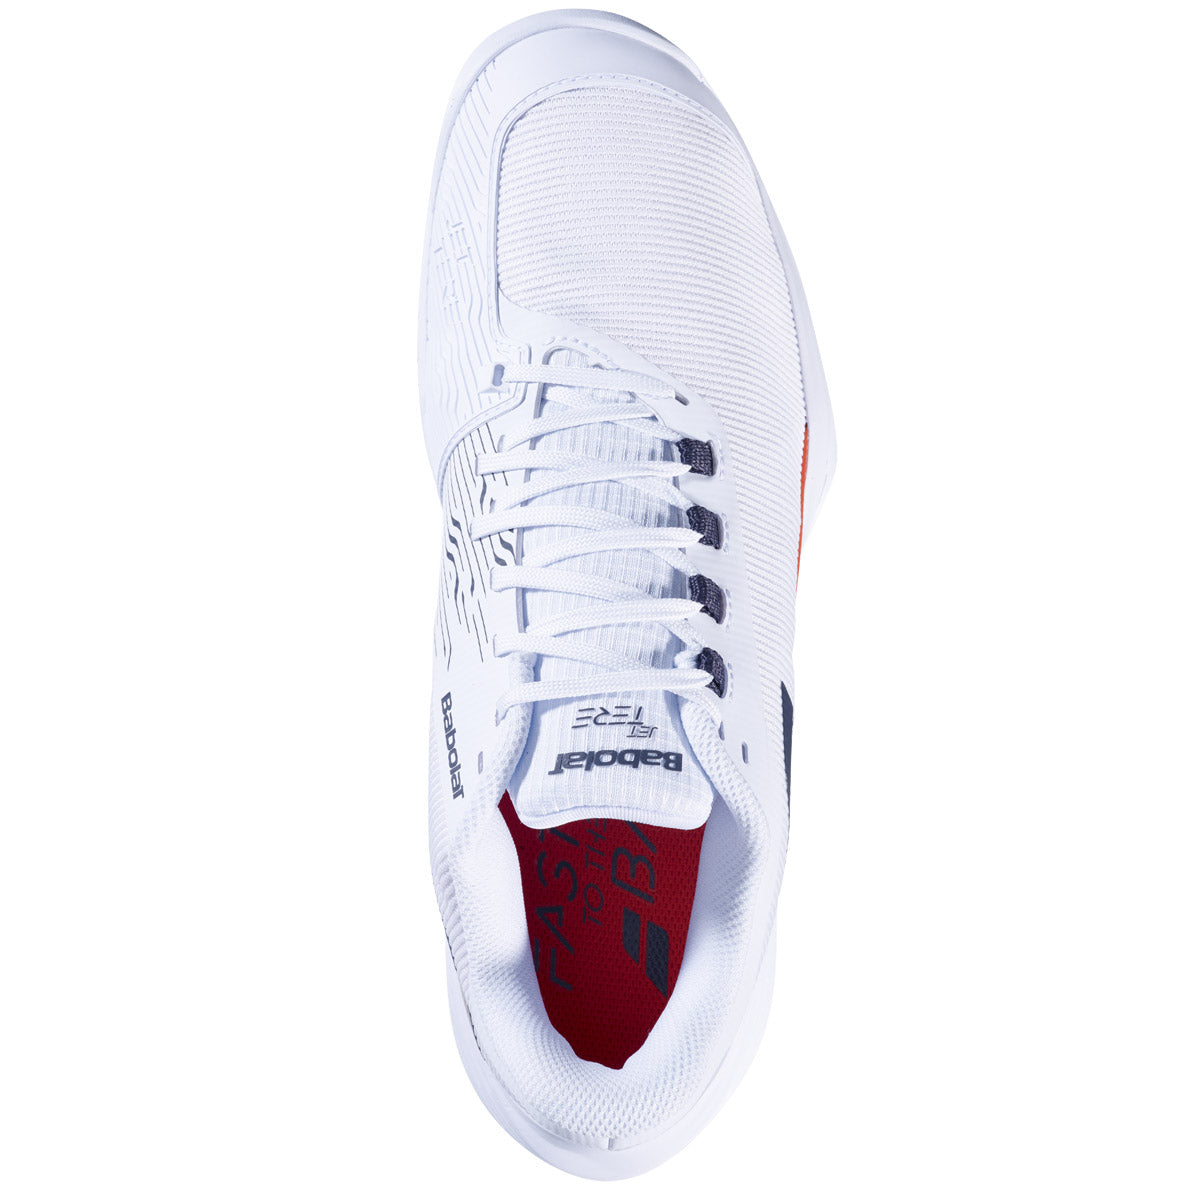 Babolat Jet Tere 2 All-Court Men Tennis Shoes - White/Strike Red